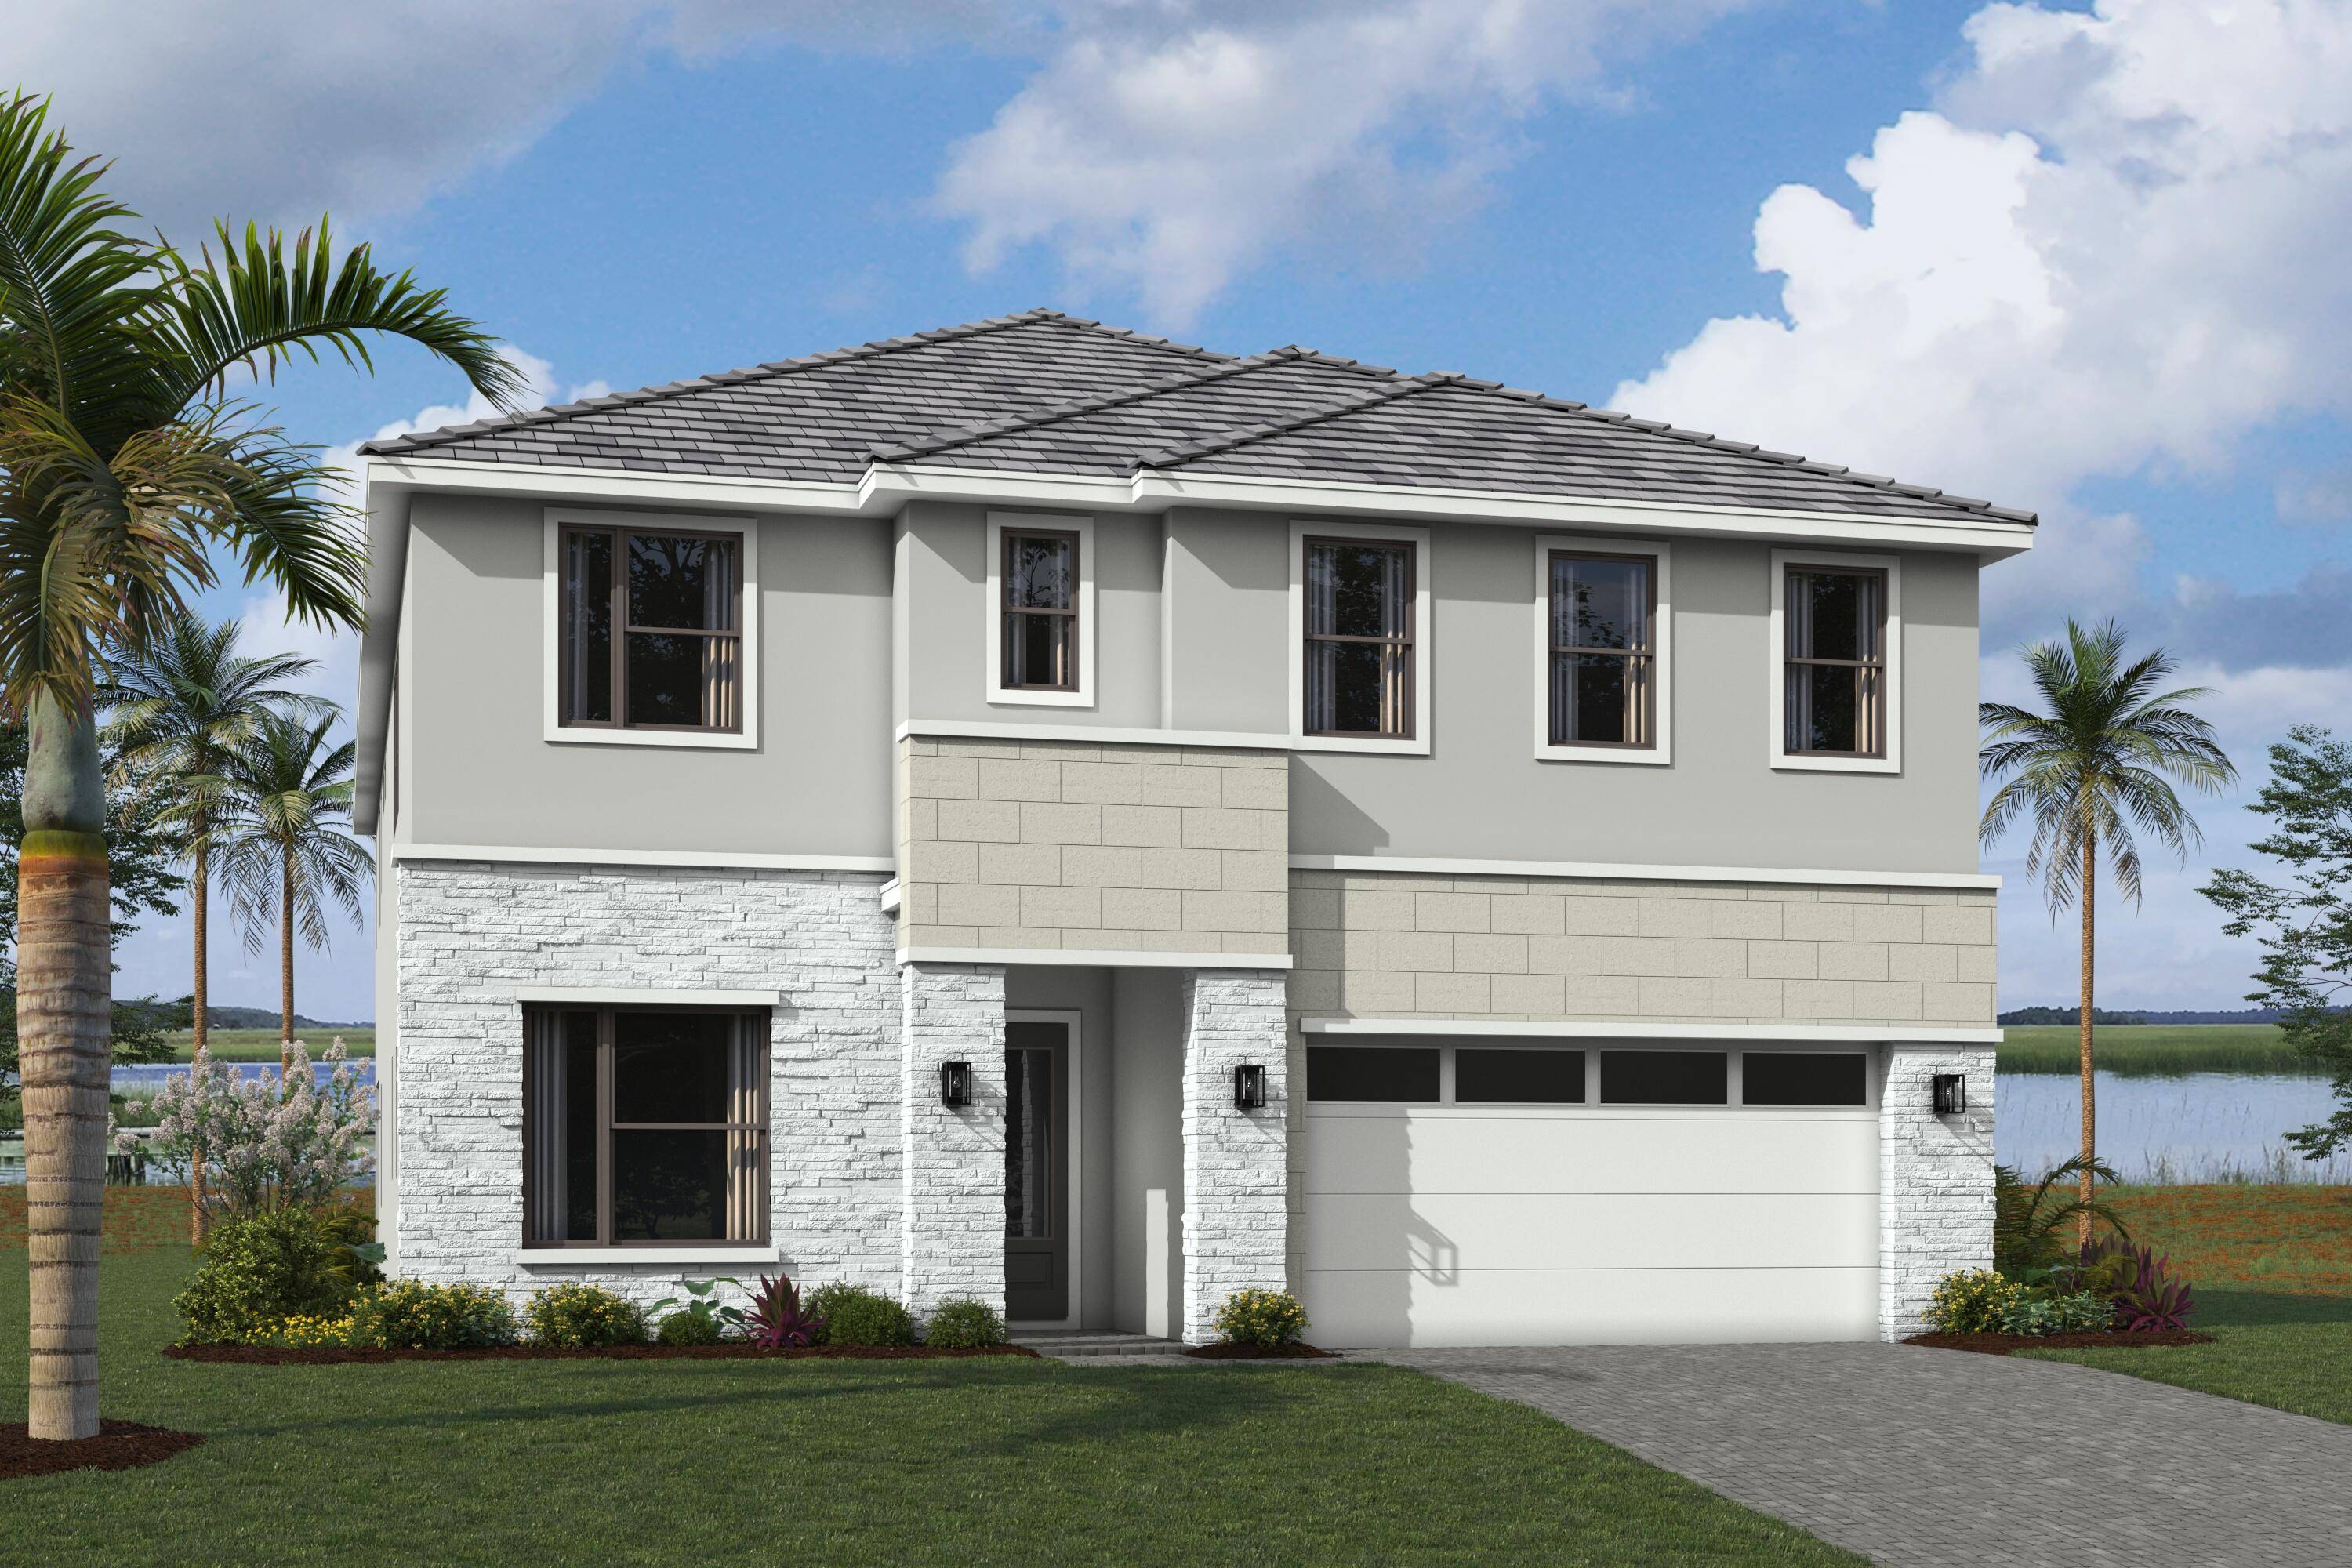 Nestled on a private cul de sac, the 3, 915 square feet Sandro plan offers a spacious two story home including 4 bedrooms and 3.